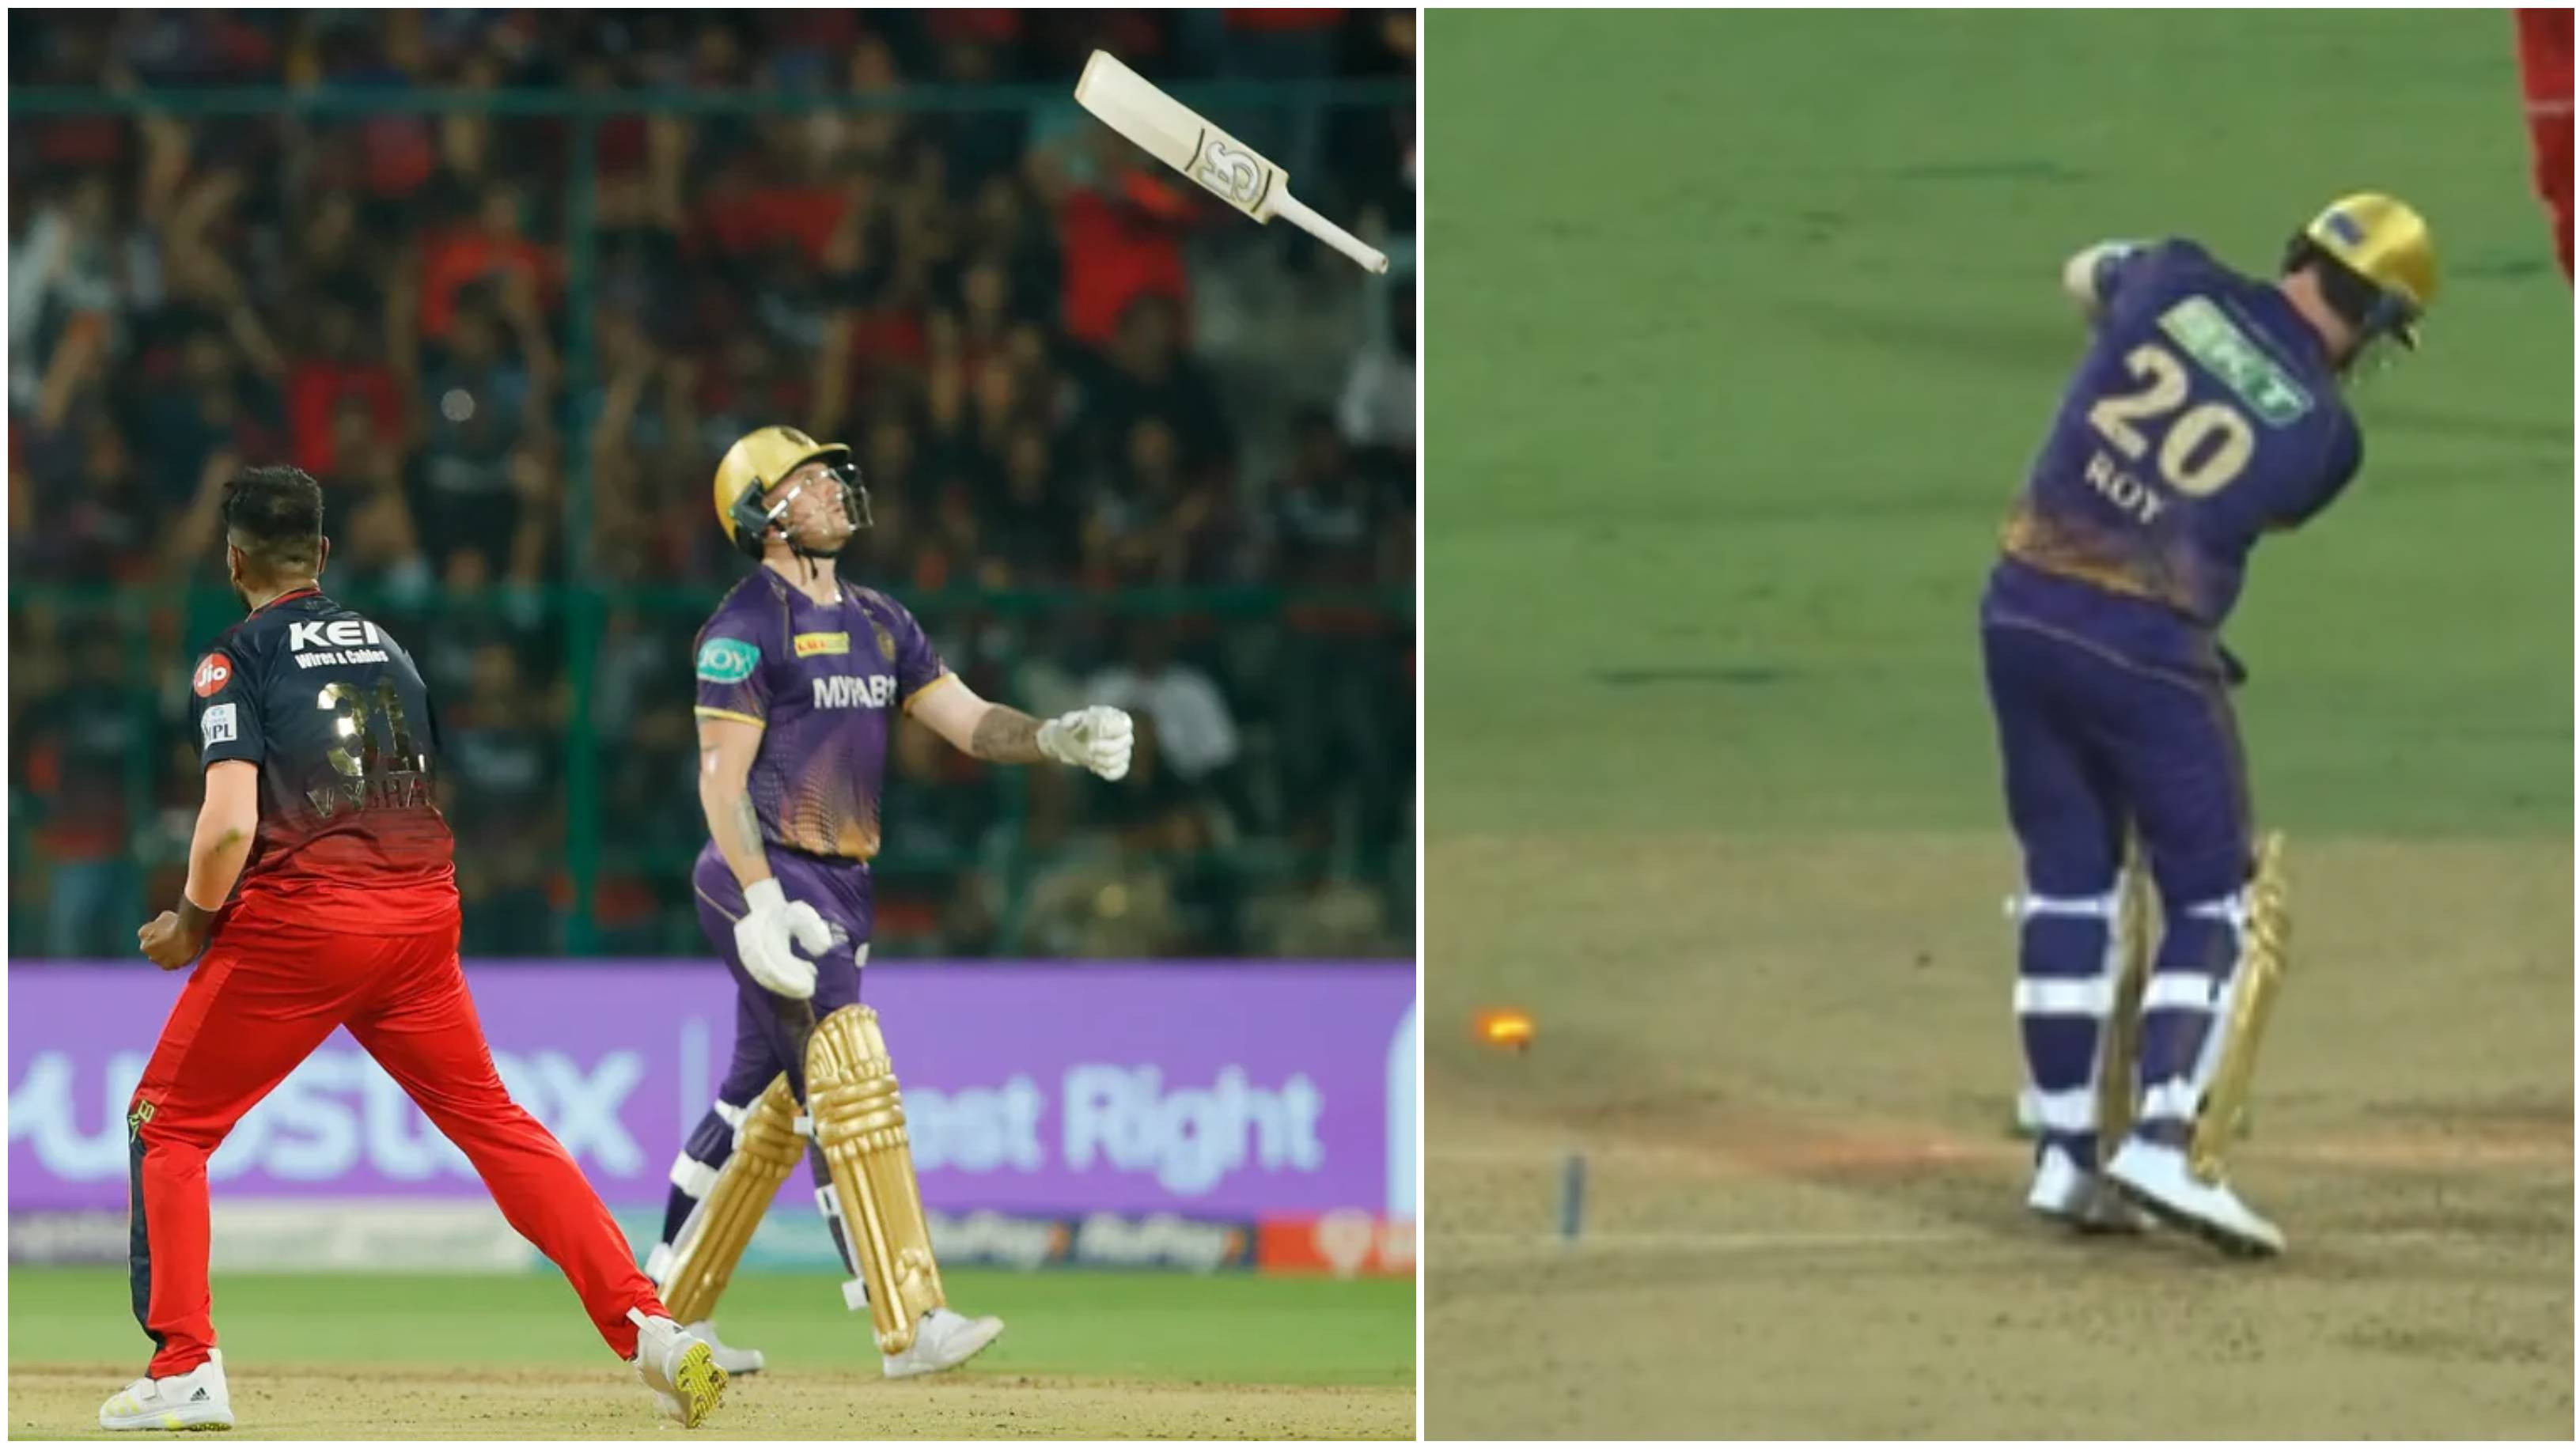 IPL 2023: Jason Roy fined 10 percent of his match fee for breaching IPL code of conduct during RCB-KKR clash